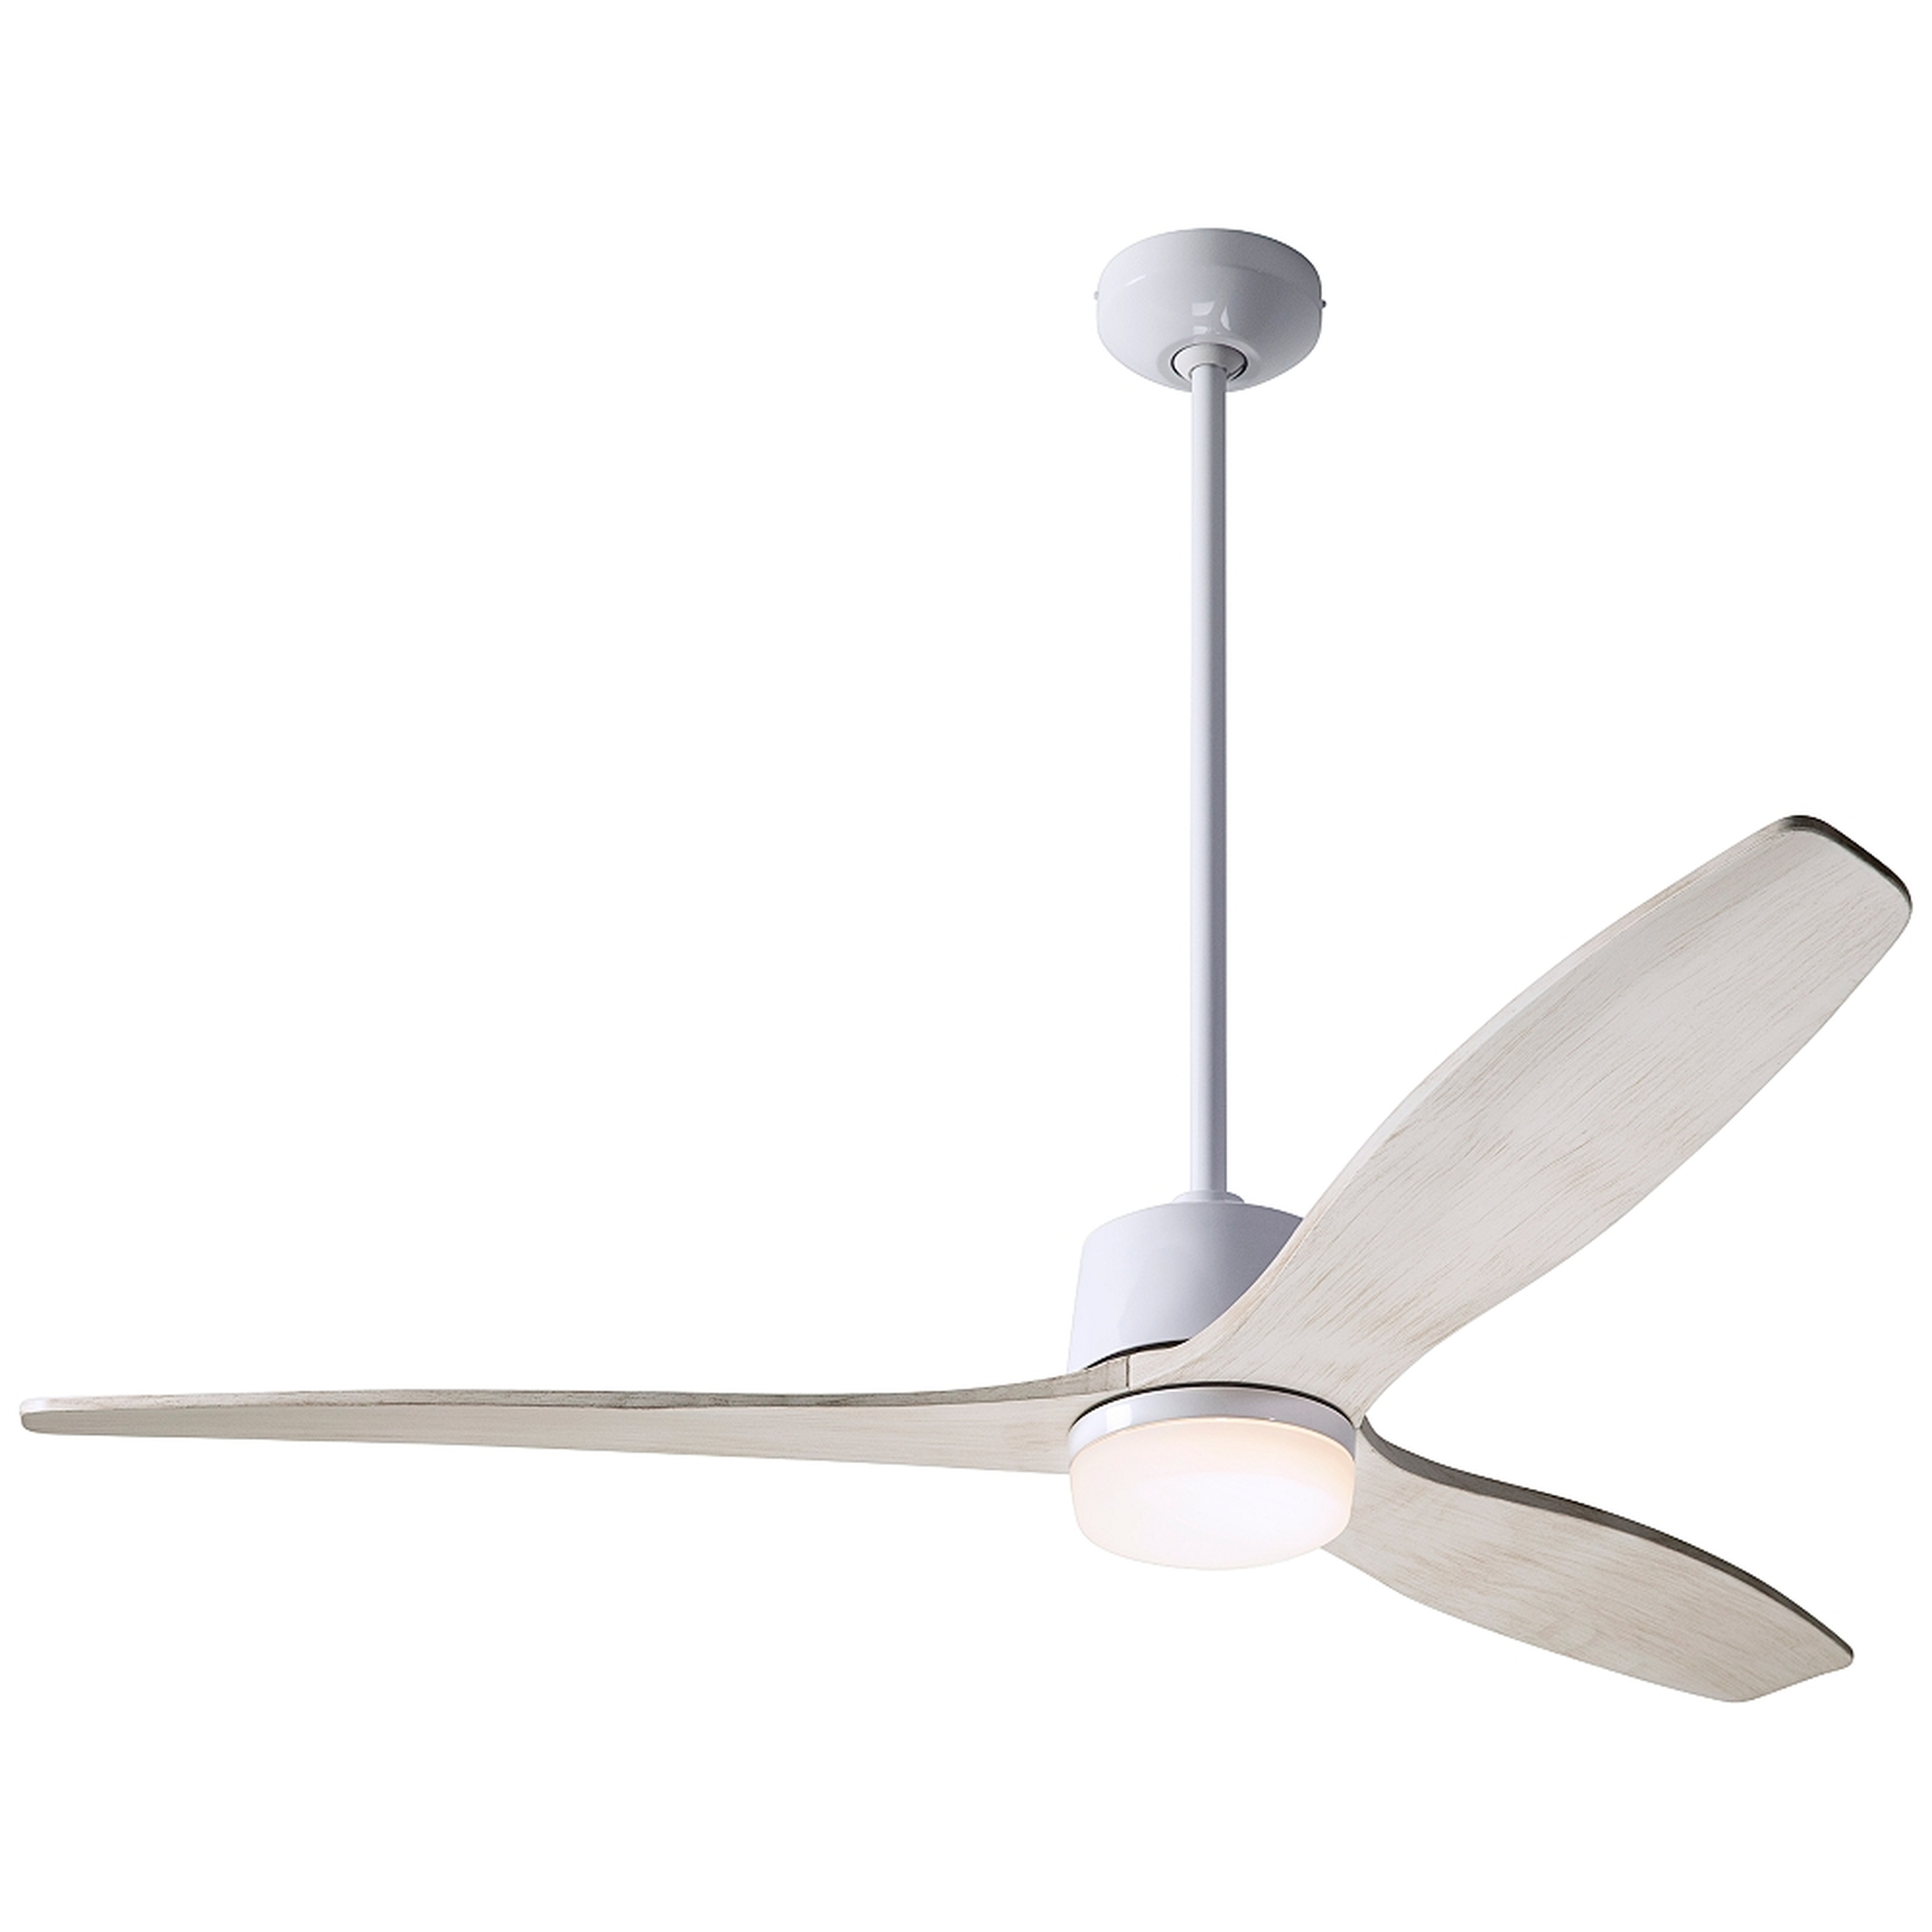 54" Modern Fan Arbor Gloss White and Whitewash Damp LED Ceiling Fan - Style # 96R90 - Lamps Plus